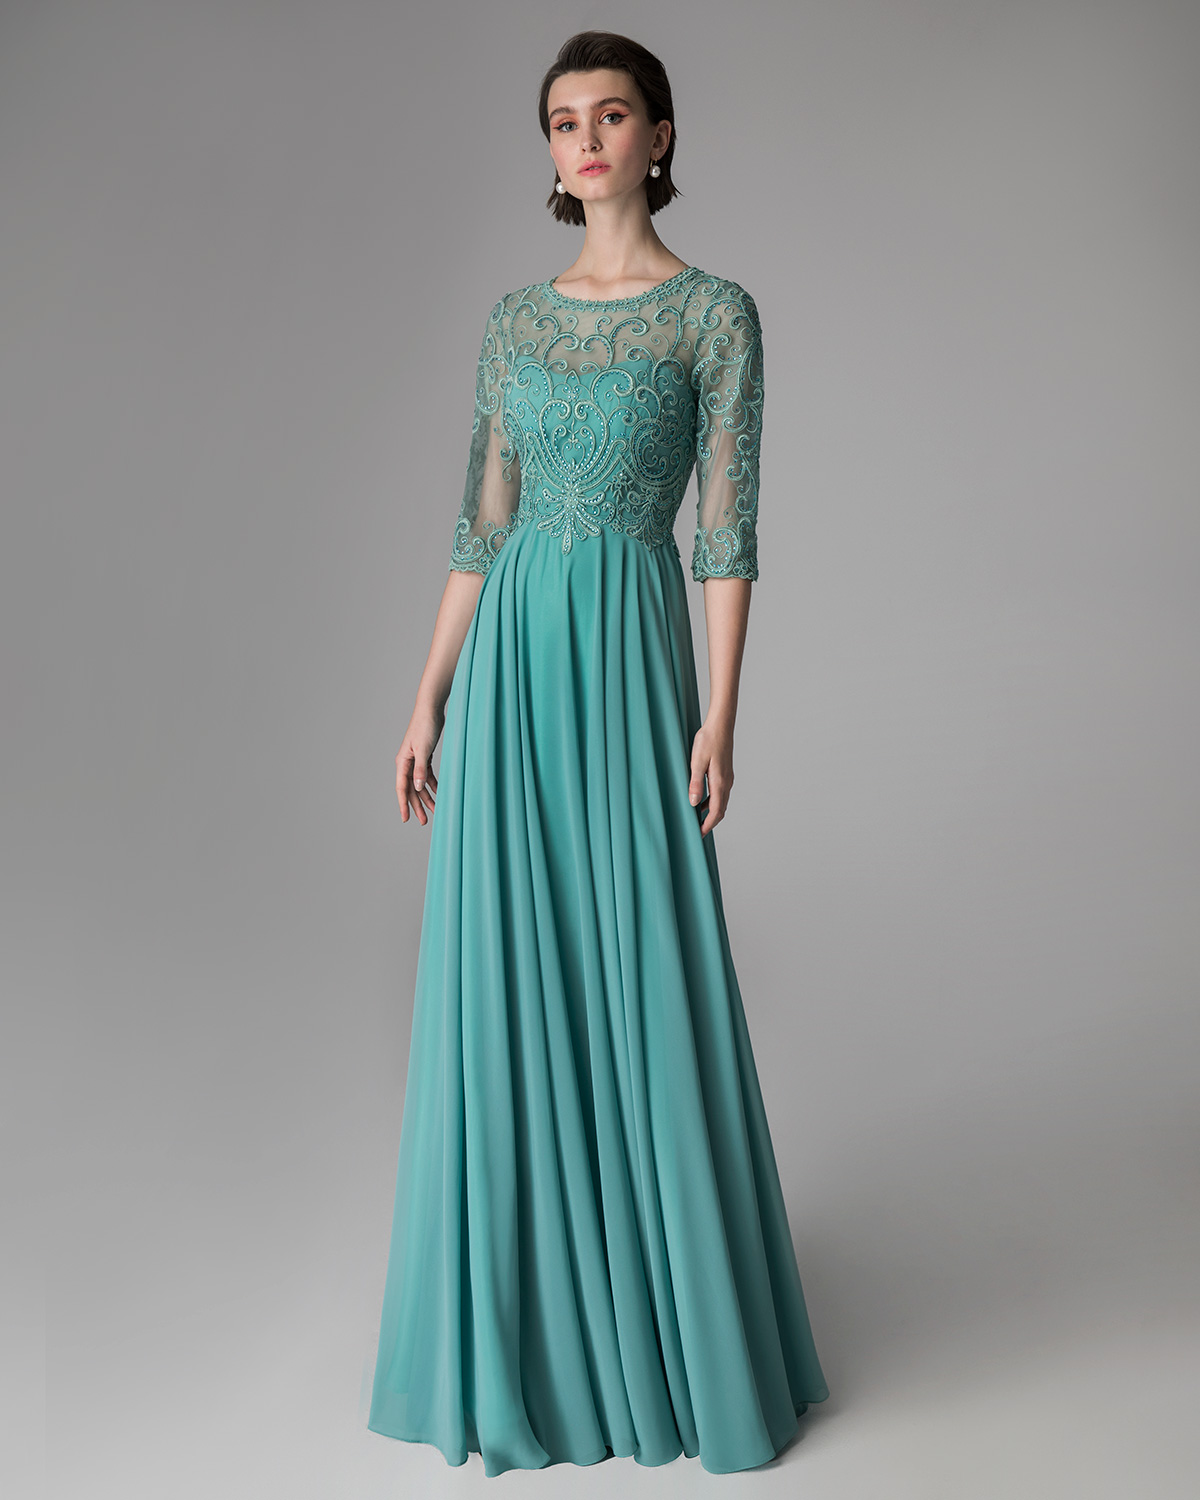 Classic Dresses / Long evening dress with applique lace on the top and long sleeves